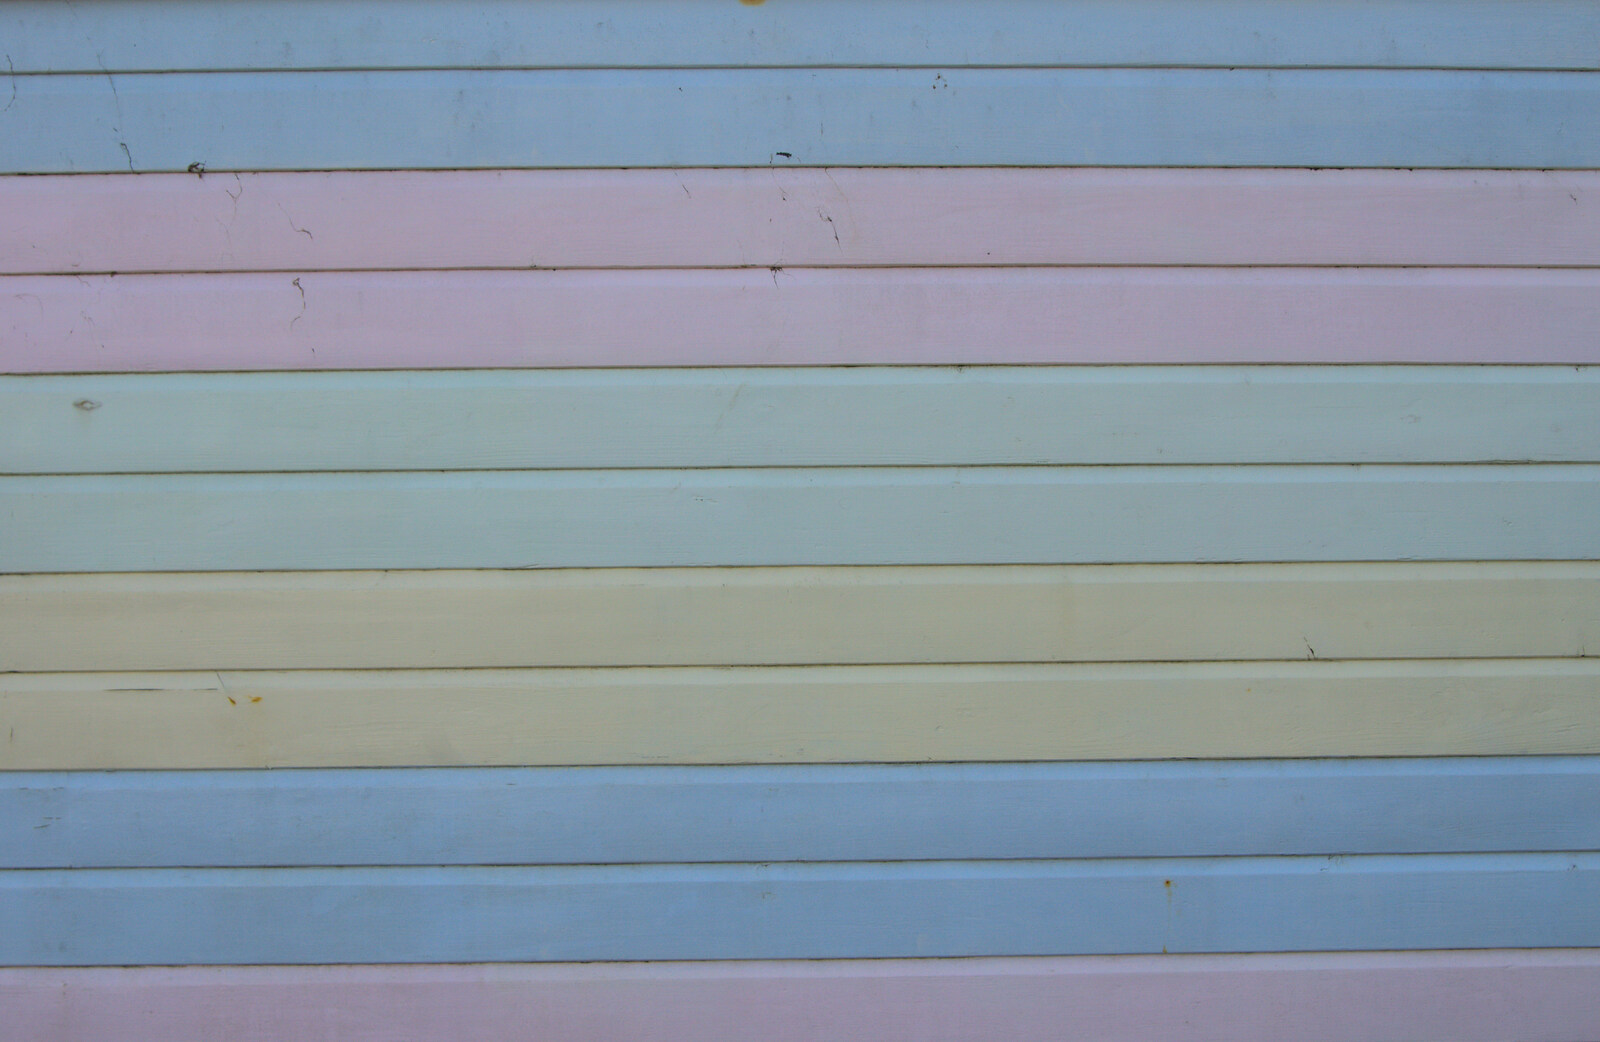 Even more pastel shadeson a beach hut from Sunset on the Beach, Southwold, Suffolk - 30th December 2014